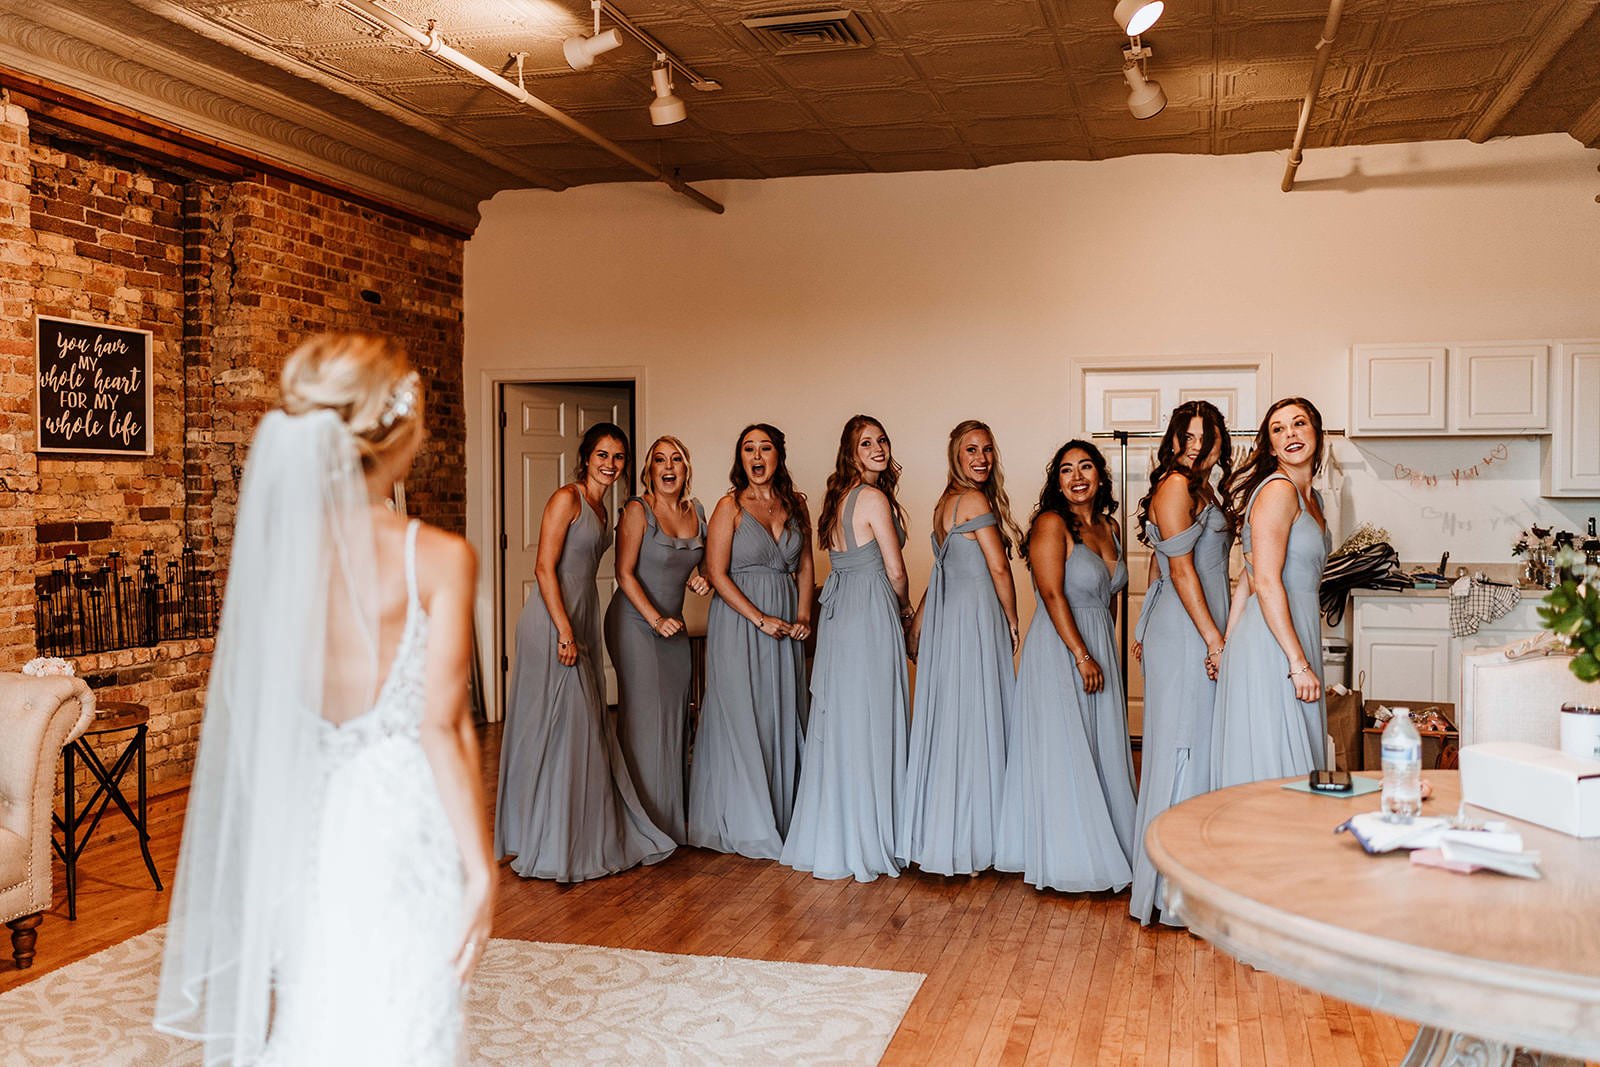 Bride has a first look with her bridesmaids the morning of her wedding day